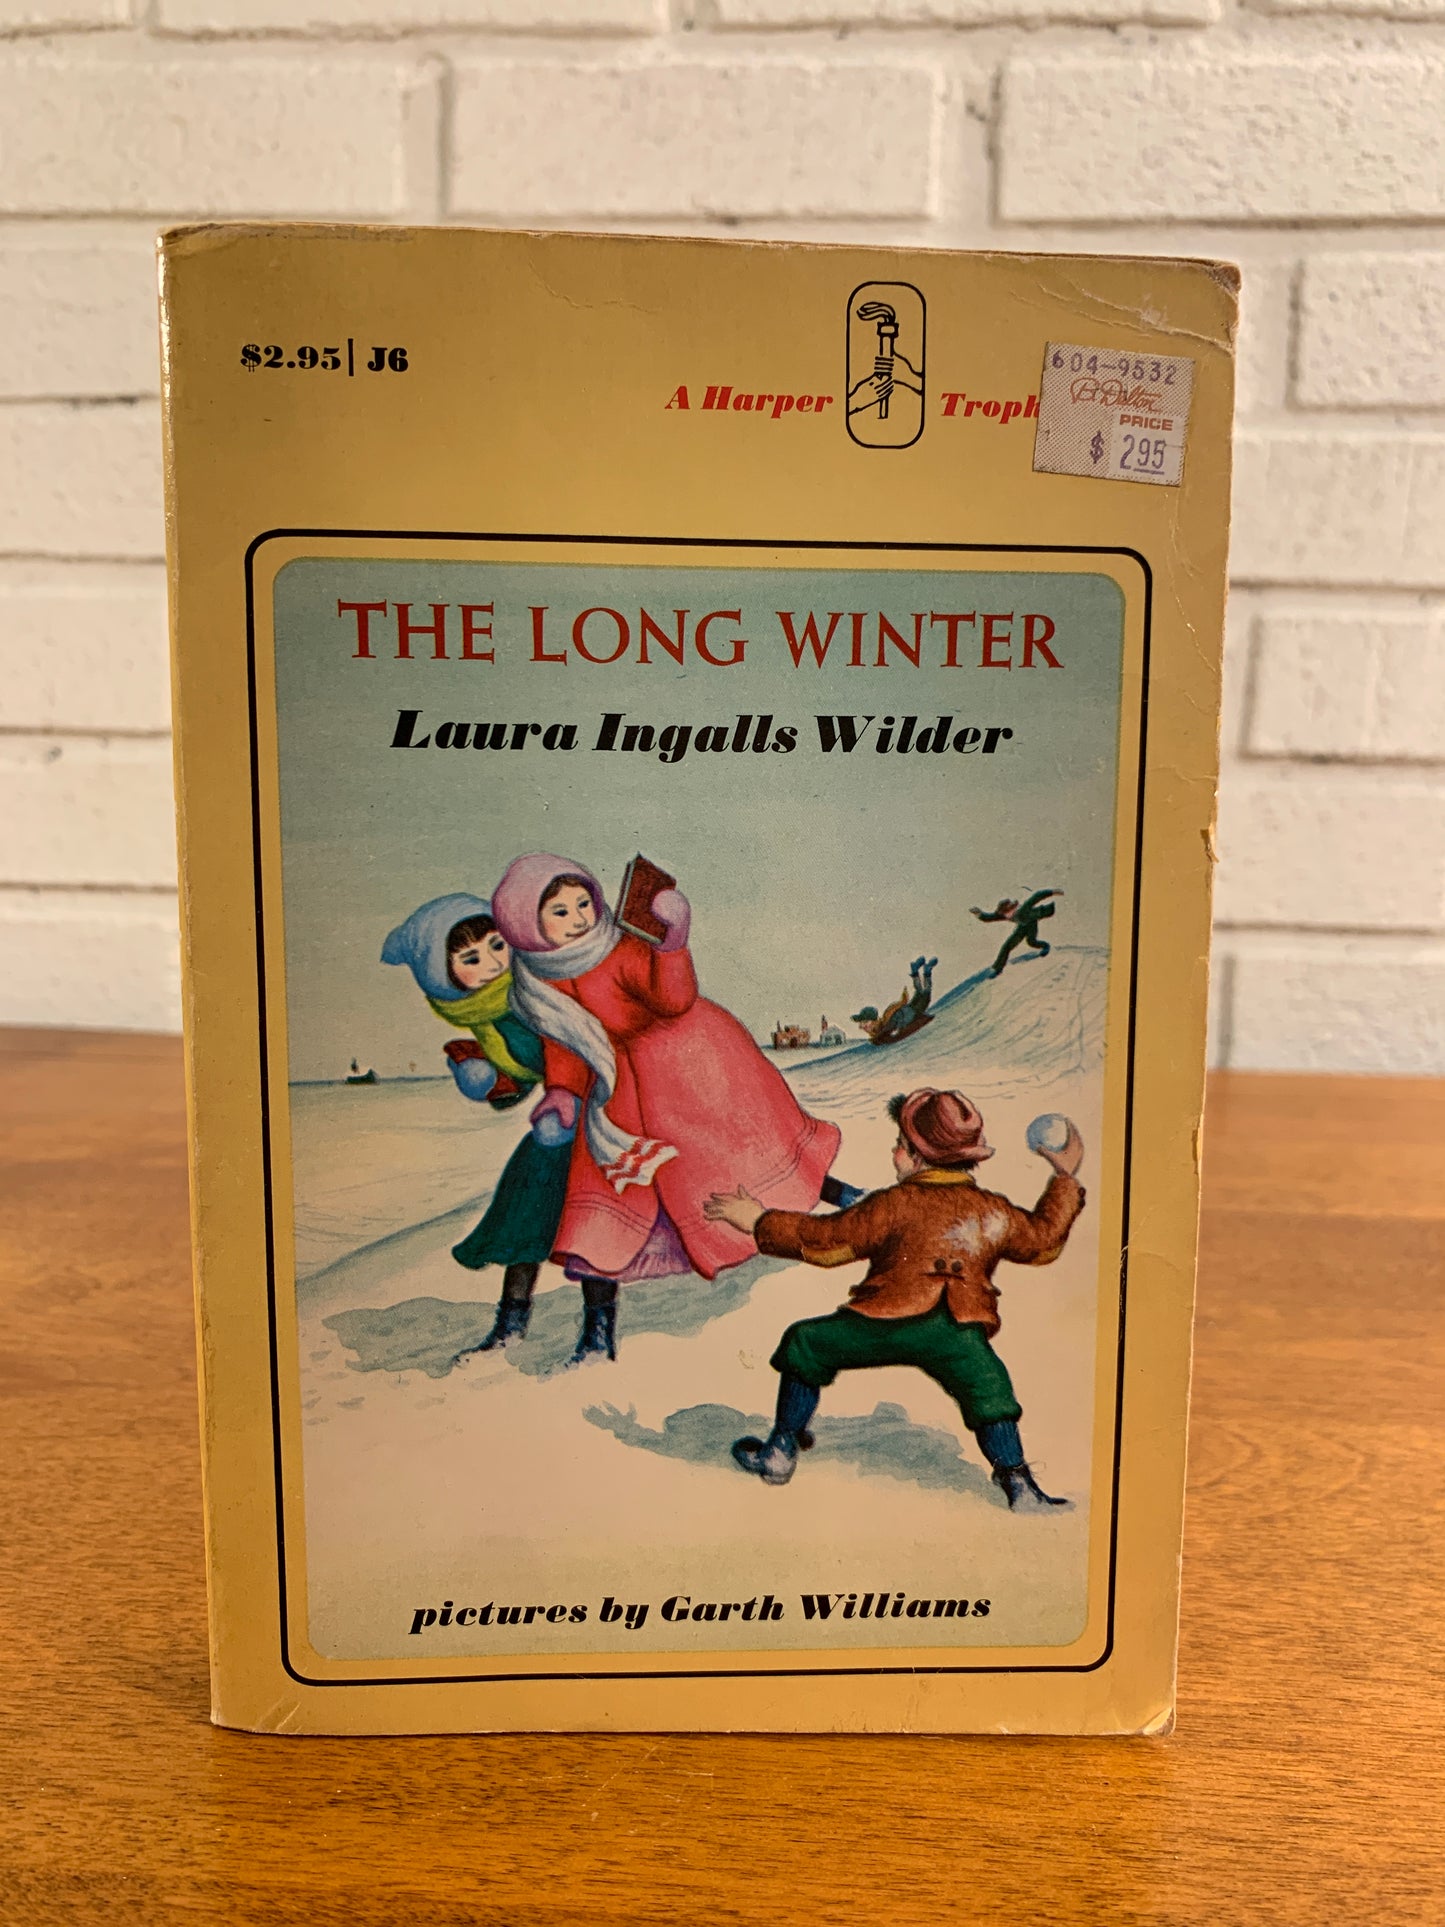 The Long Winter by Laura Ingalls Wilder [1971]